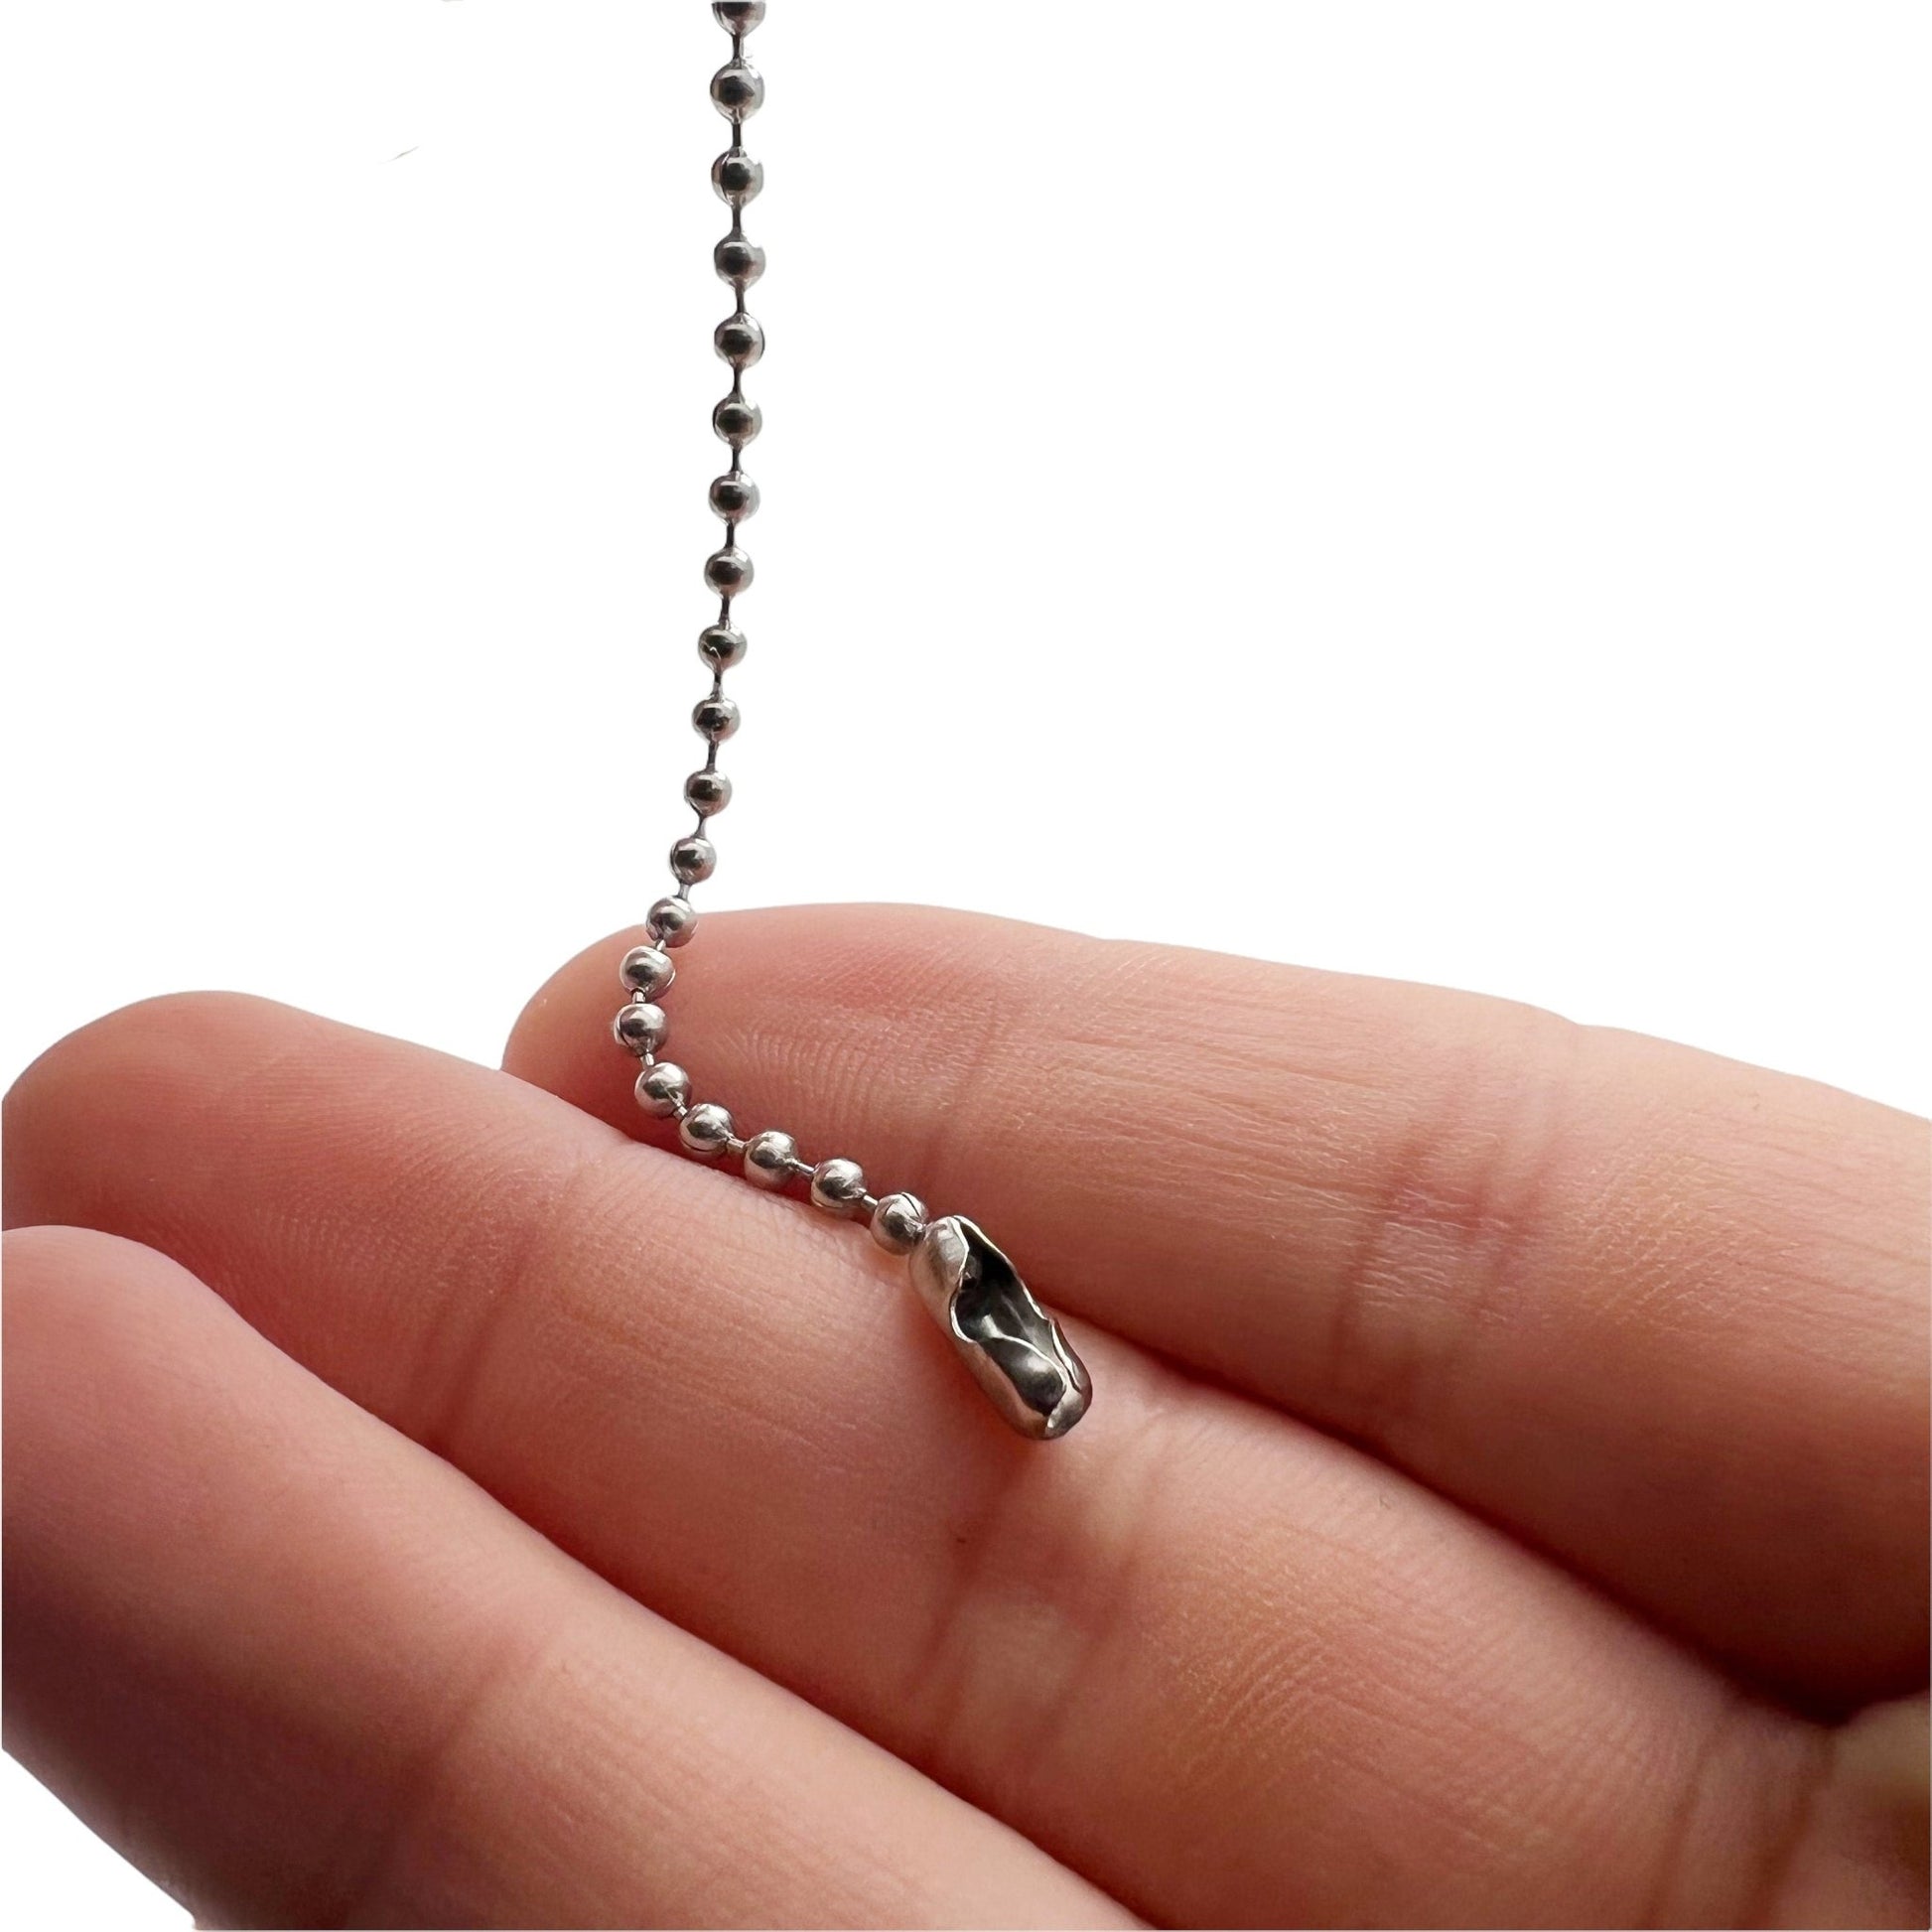 Stainless Steel Ball Chains Bead For Dog Tags Necklaces 304 Grade 4" Length (10cm) - TheDogTagCo